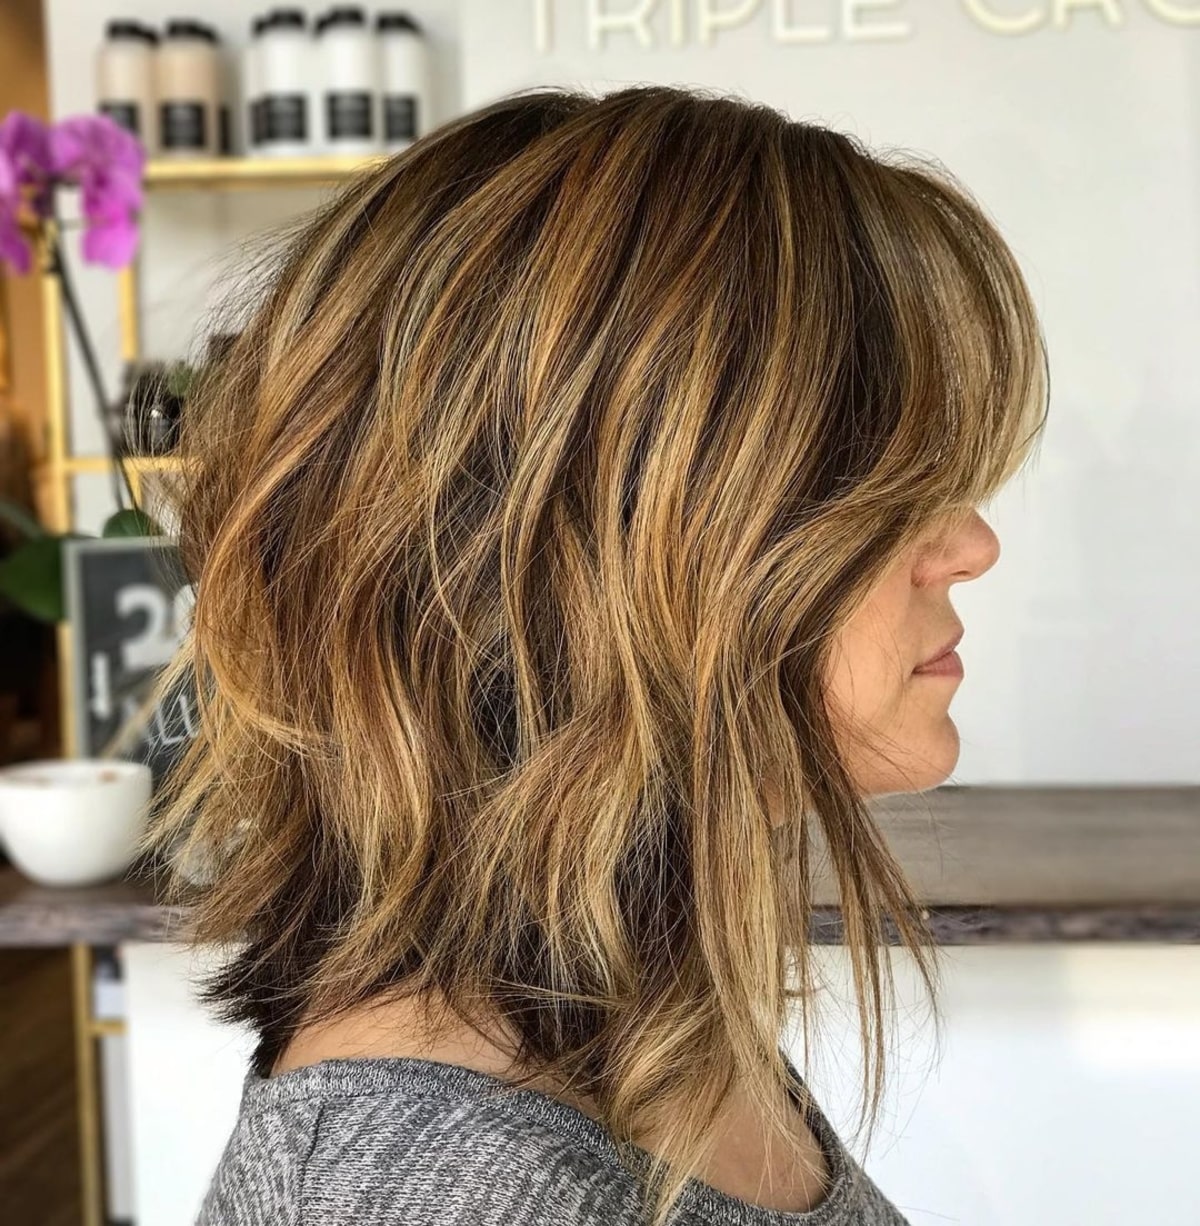 20 Fantastic Short to Medium Layered Haircuts for That In-Between Length